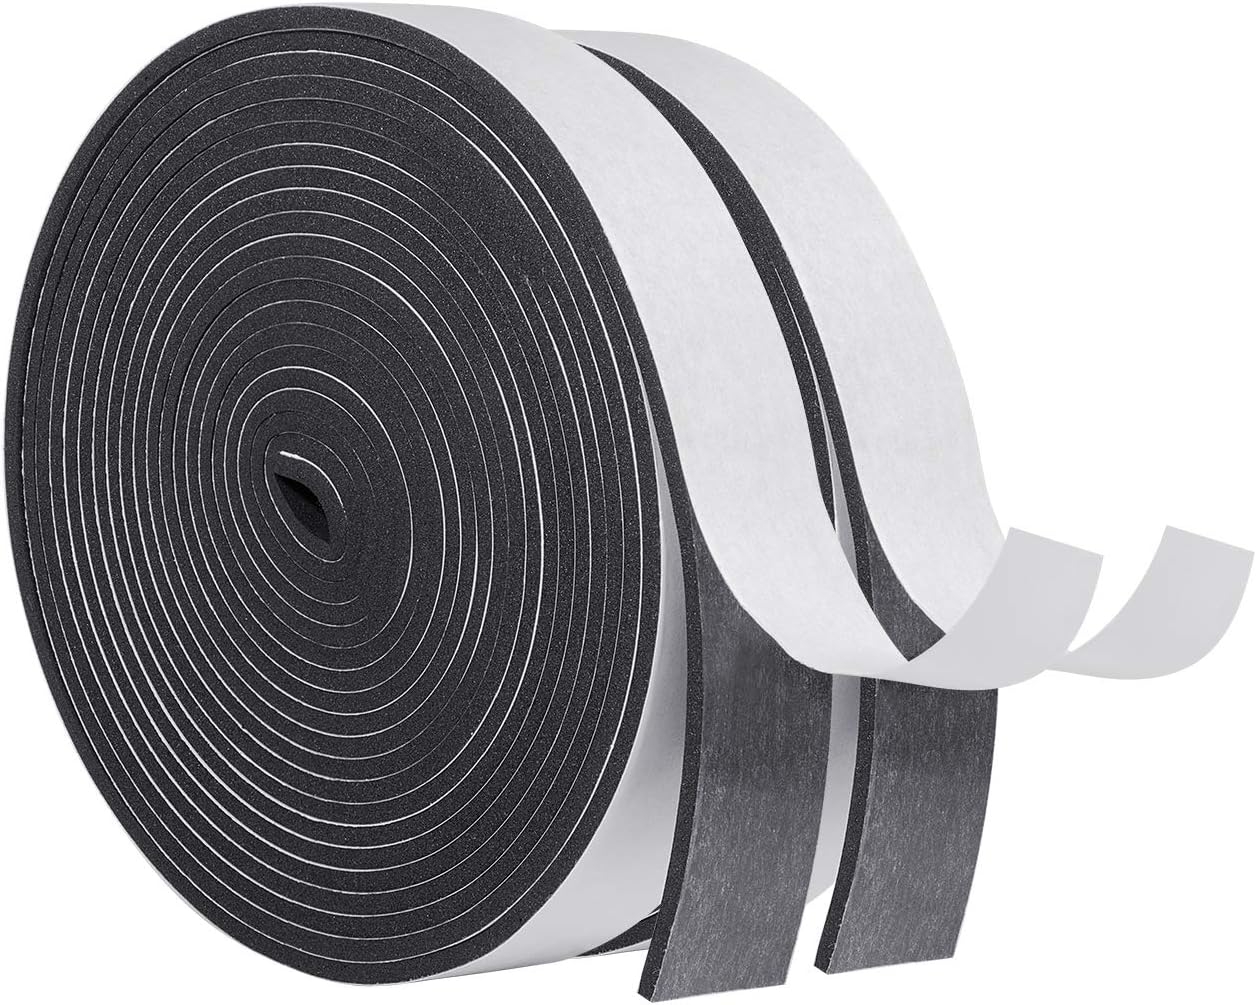 Foam Strips with Adhesive-2 Rolls, 1 Inch Wide X 1/8 Inch Thick High Density Soundproofing Door Insulation AC Unit Weather Seal Total 33 Feet Long(16.5ft x 2 Rolls)